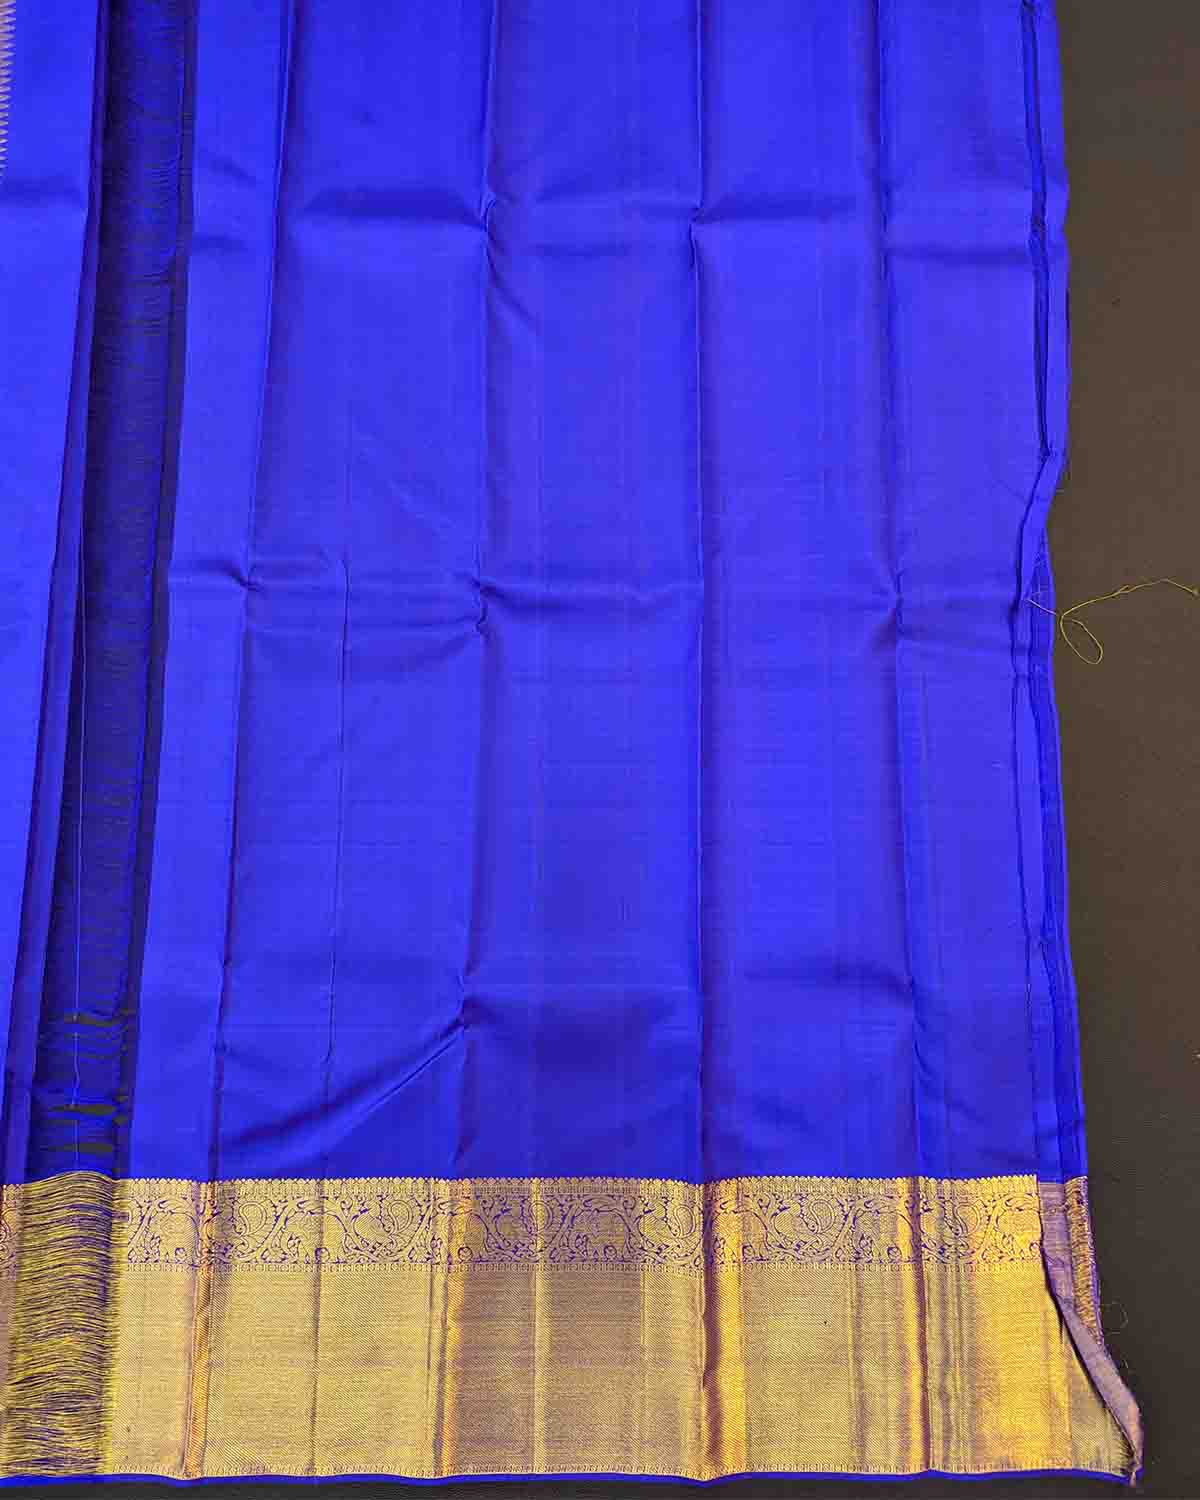 Exquisite Saree with Annam-Elephant Border and Floral Buttas